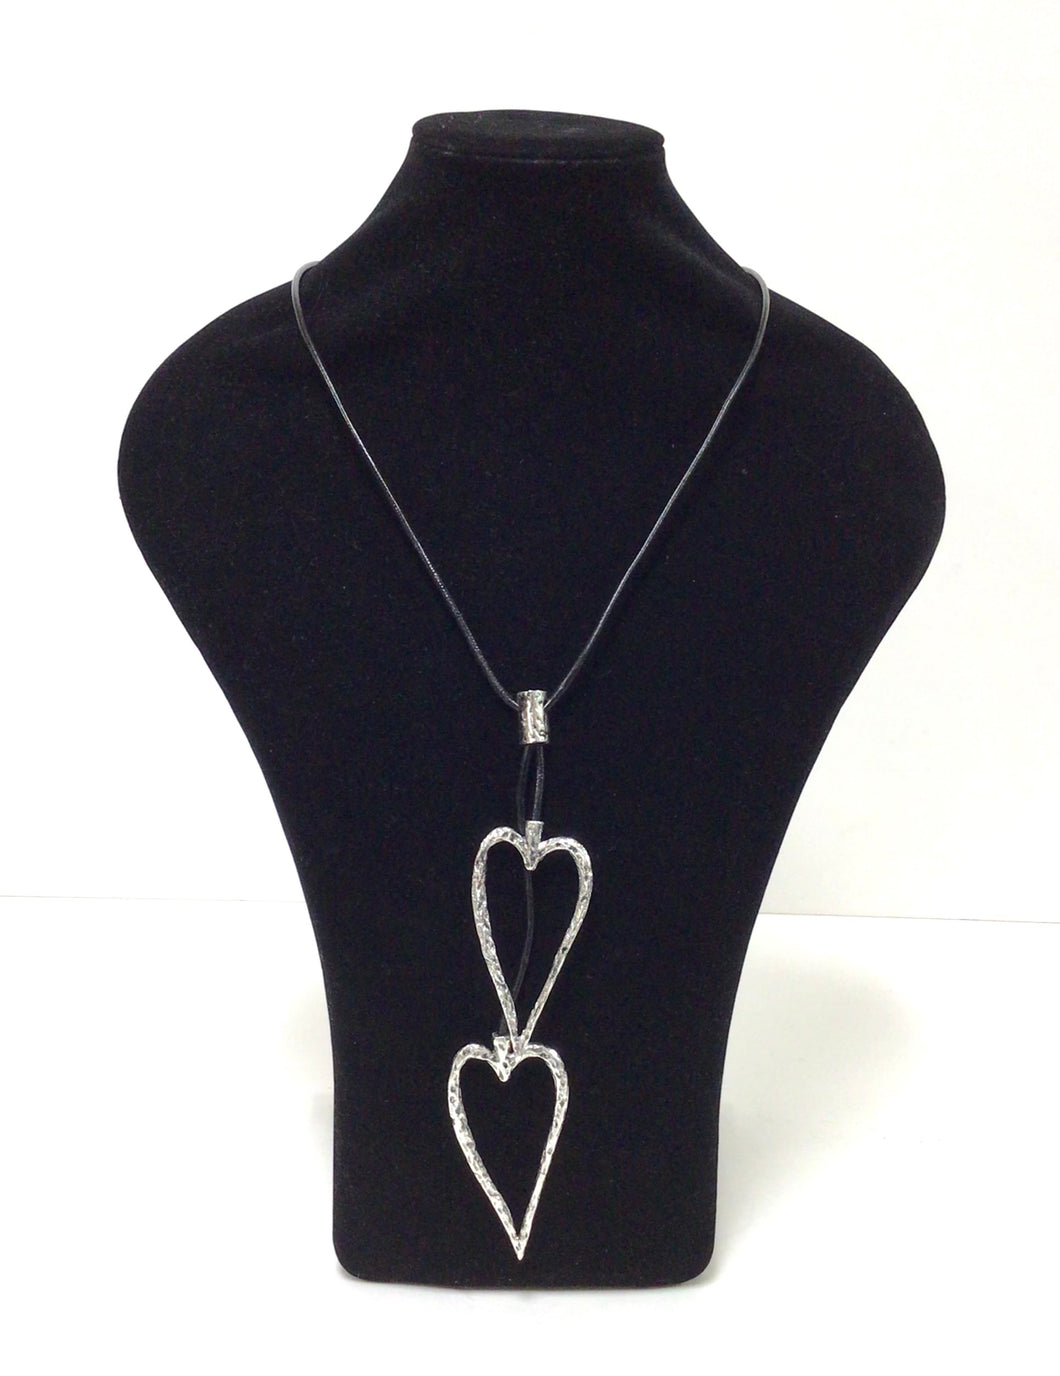 Open Hearts necklace in mottled silvertone metal has two open-hearts that hang on a smooth black  leather-like cord  that does have a lobster claw clap that can add an additional 2